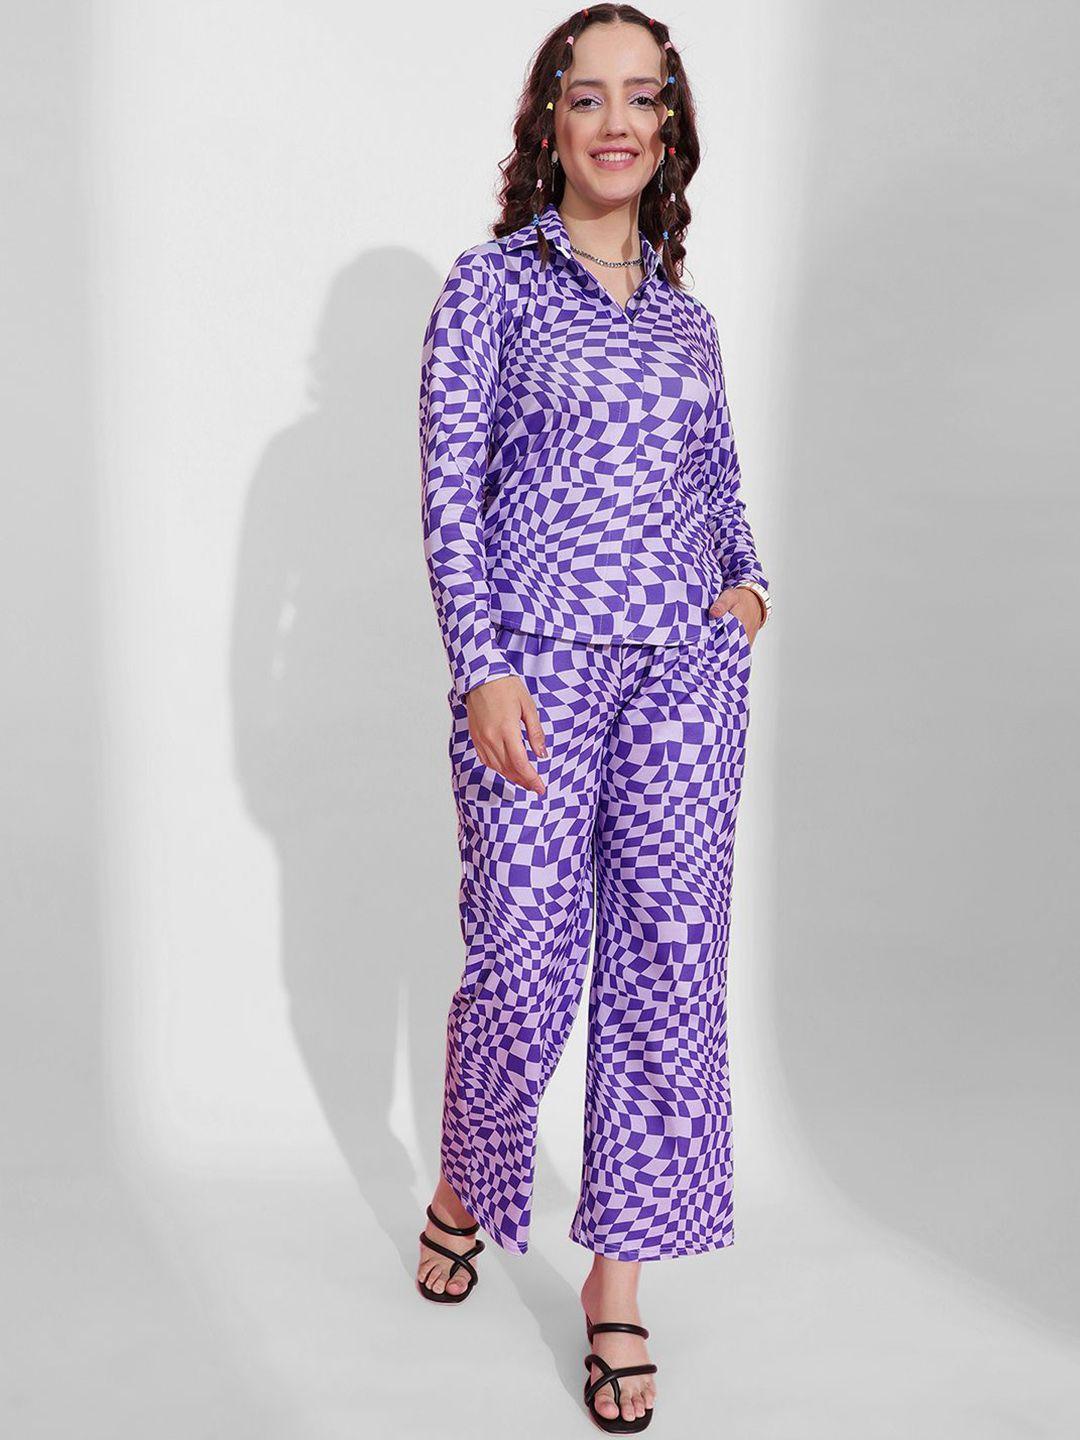 selvia checked top with trousers co-ords